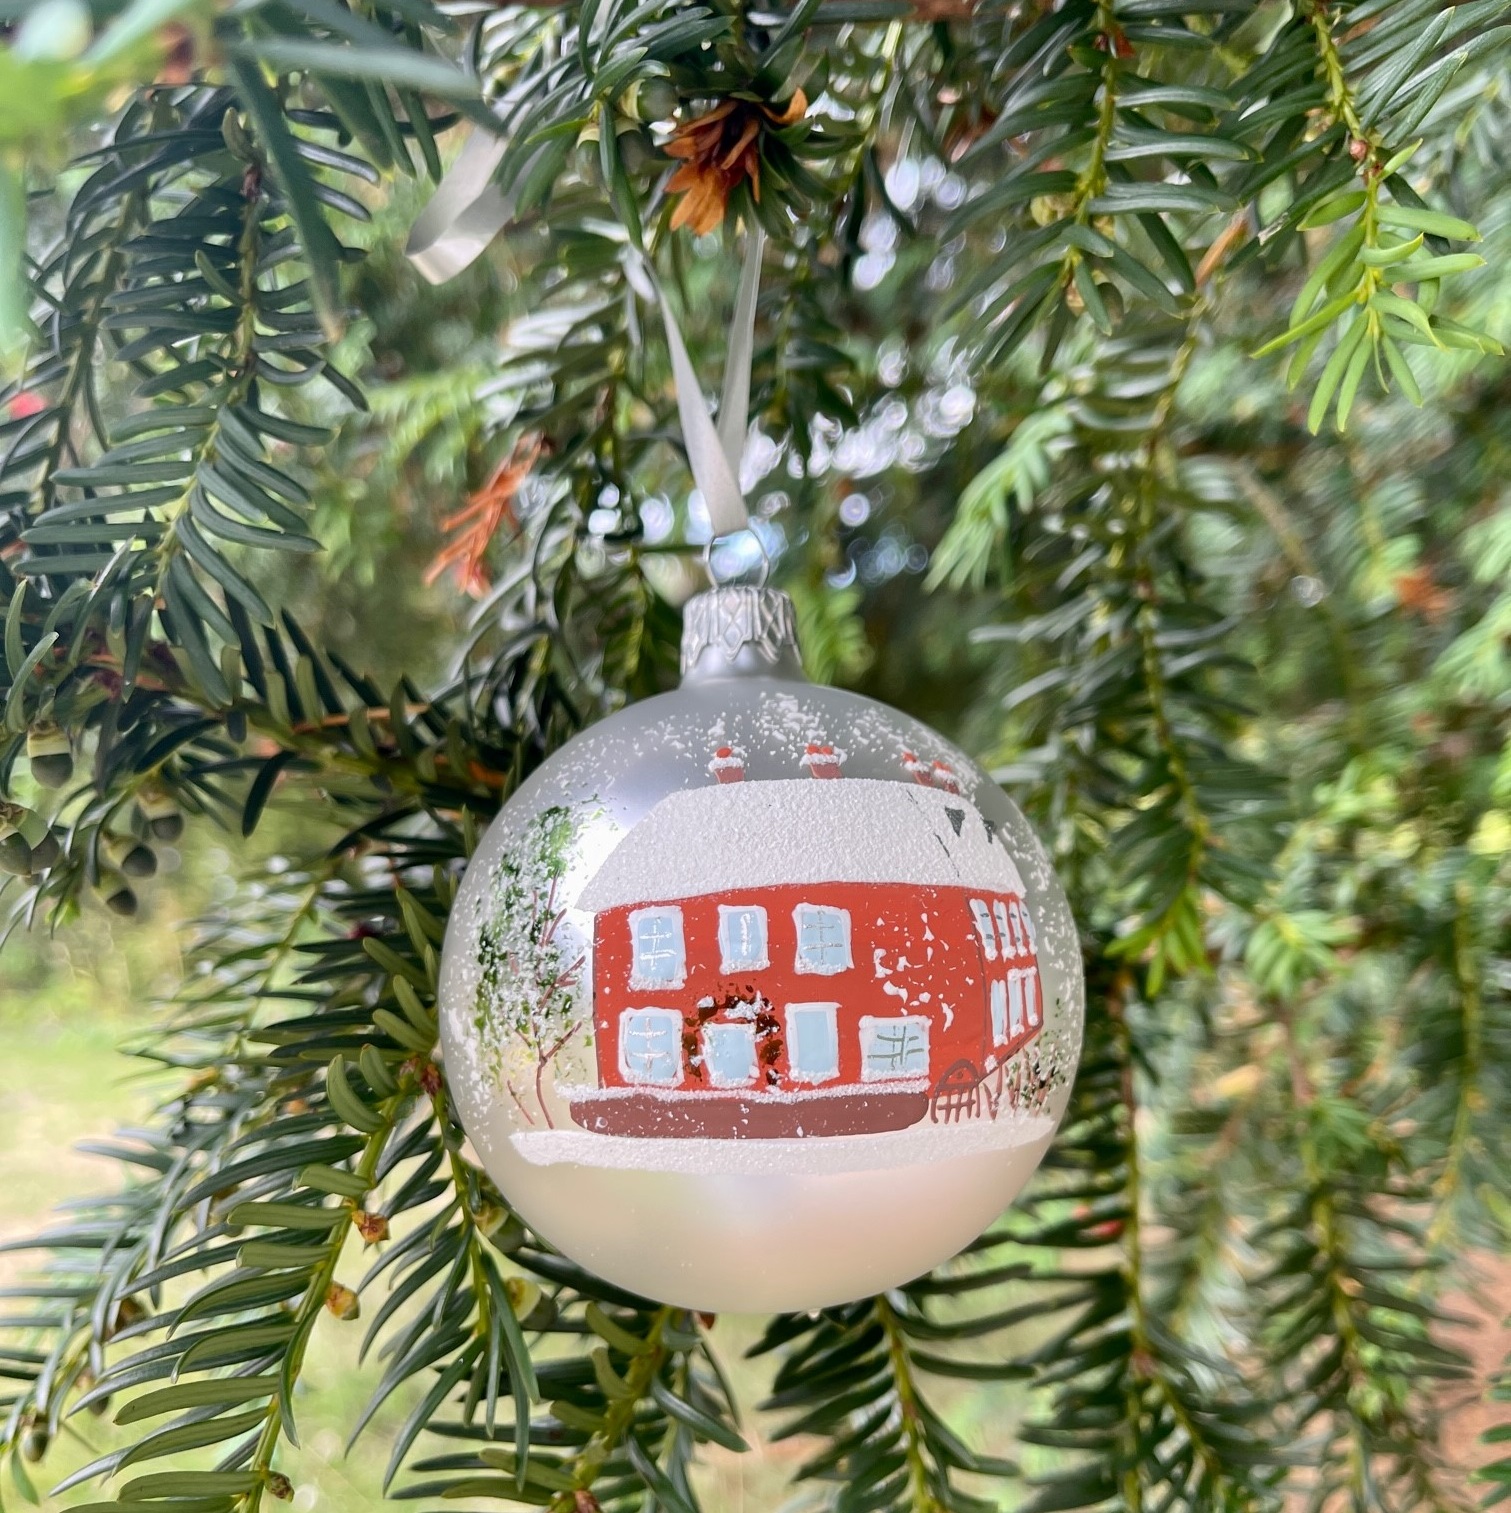 A silver Christmas bauble depicting Jane Austen's House in red, hanging on a Christmas tree